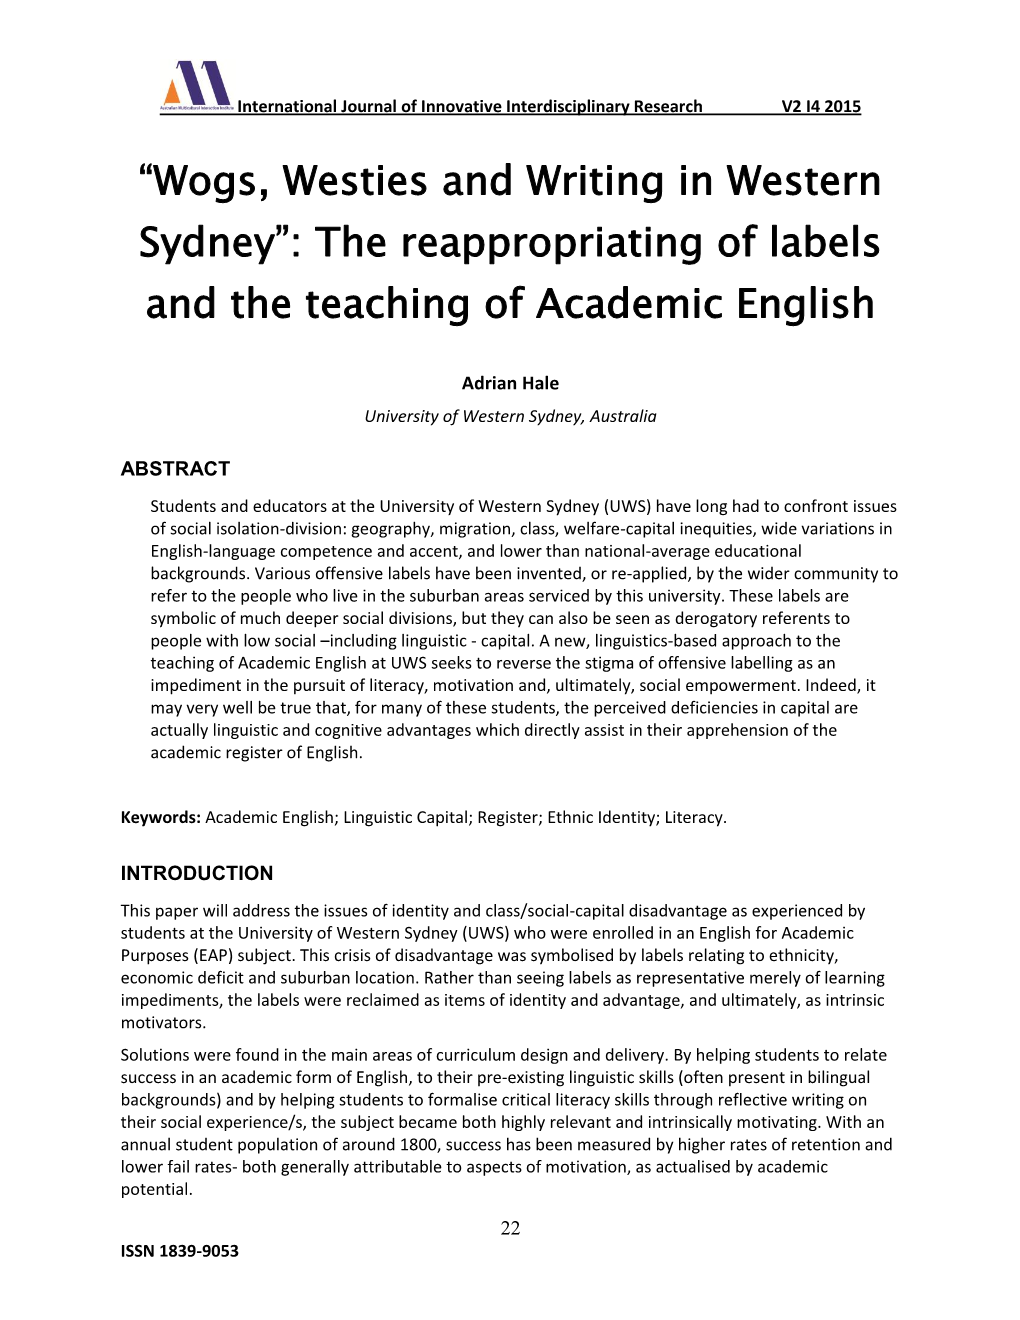 The Reappropriating of Labels and the Teaching of Academic English